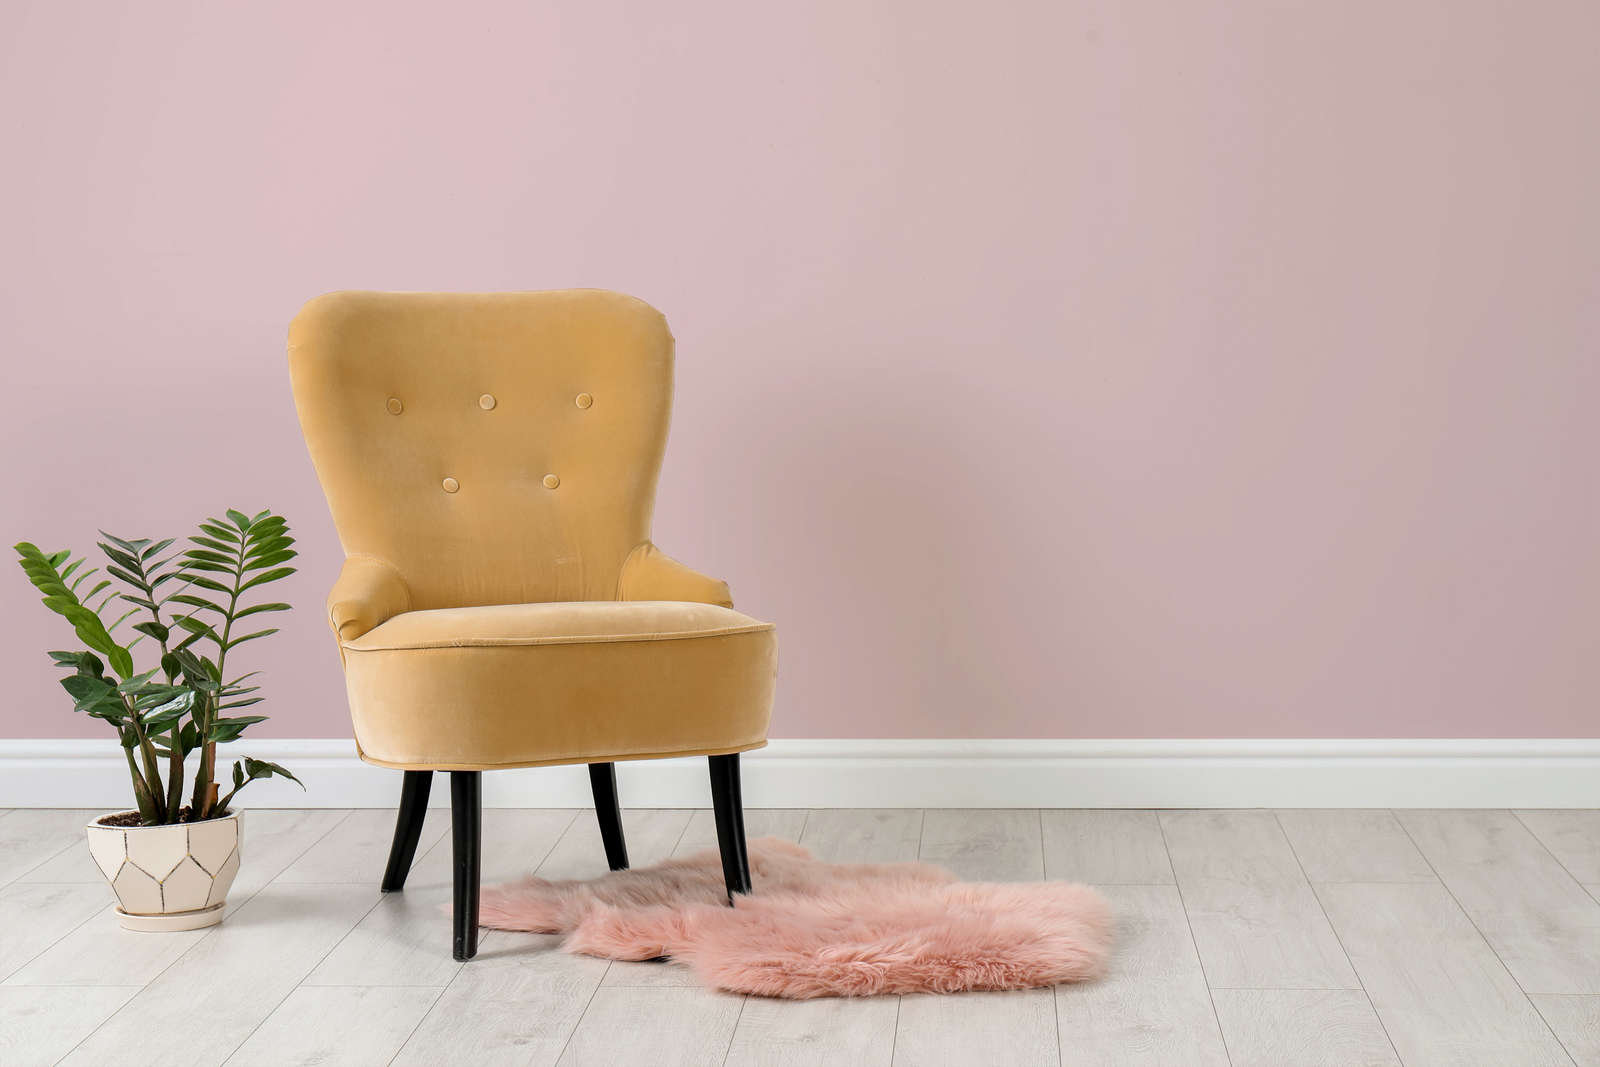             Wall Paint TCK7008 »Cute Cupcake« in delicate pink – 2.5 litre
        